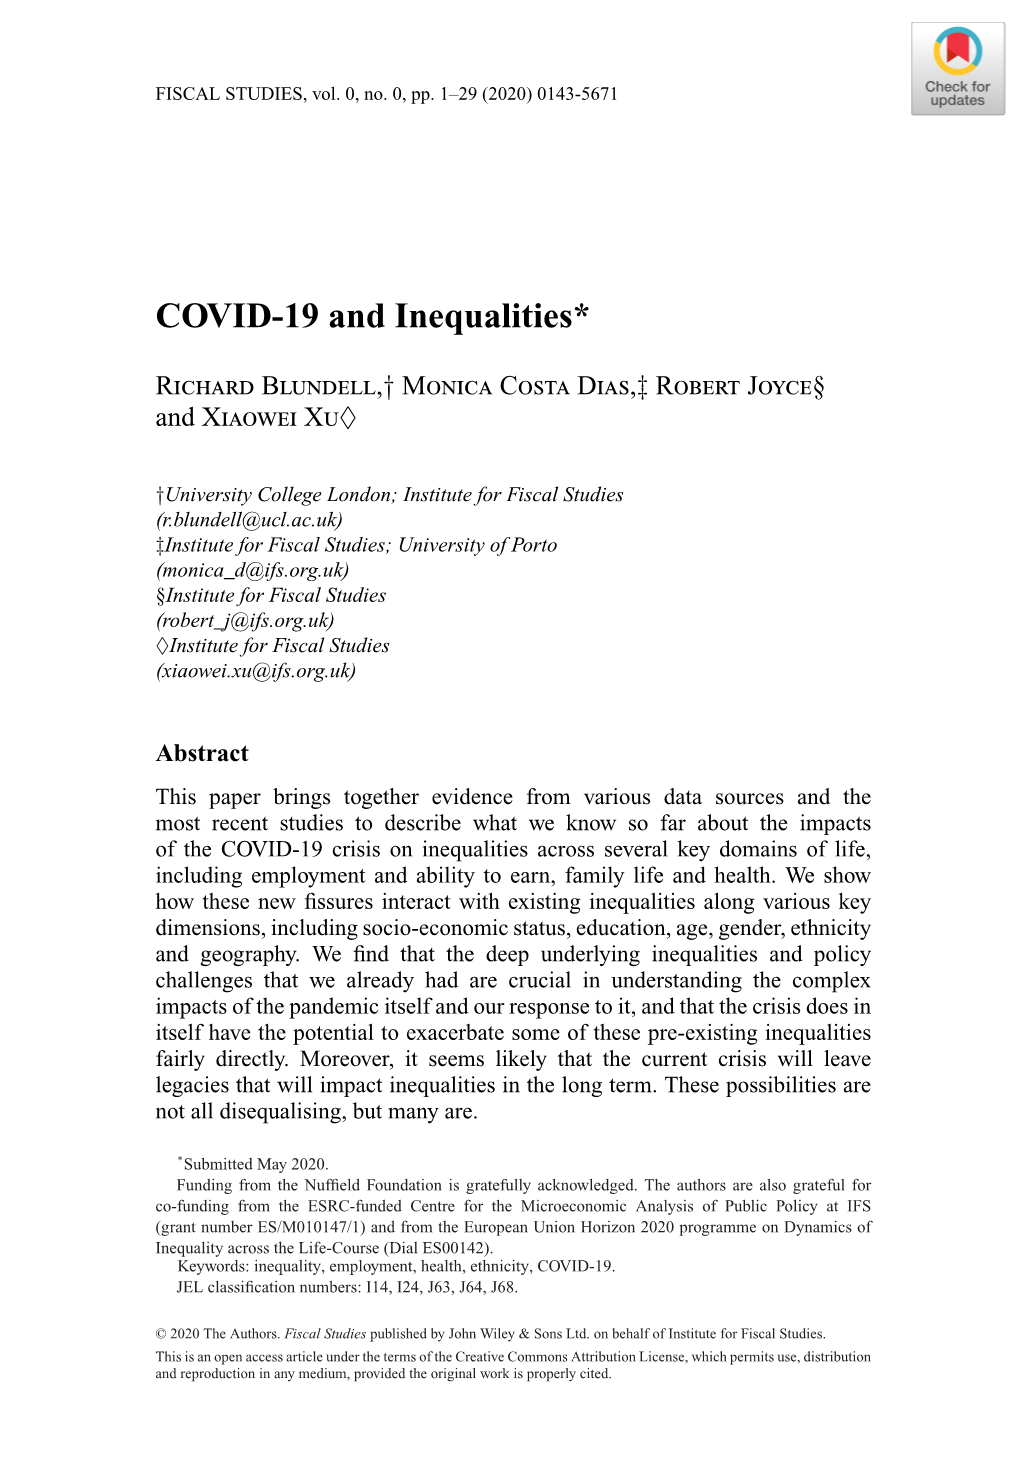 COVID‐19 and Inequalities* (Ucl.Ac.Uk)